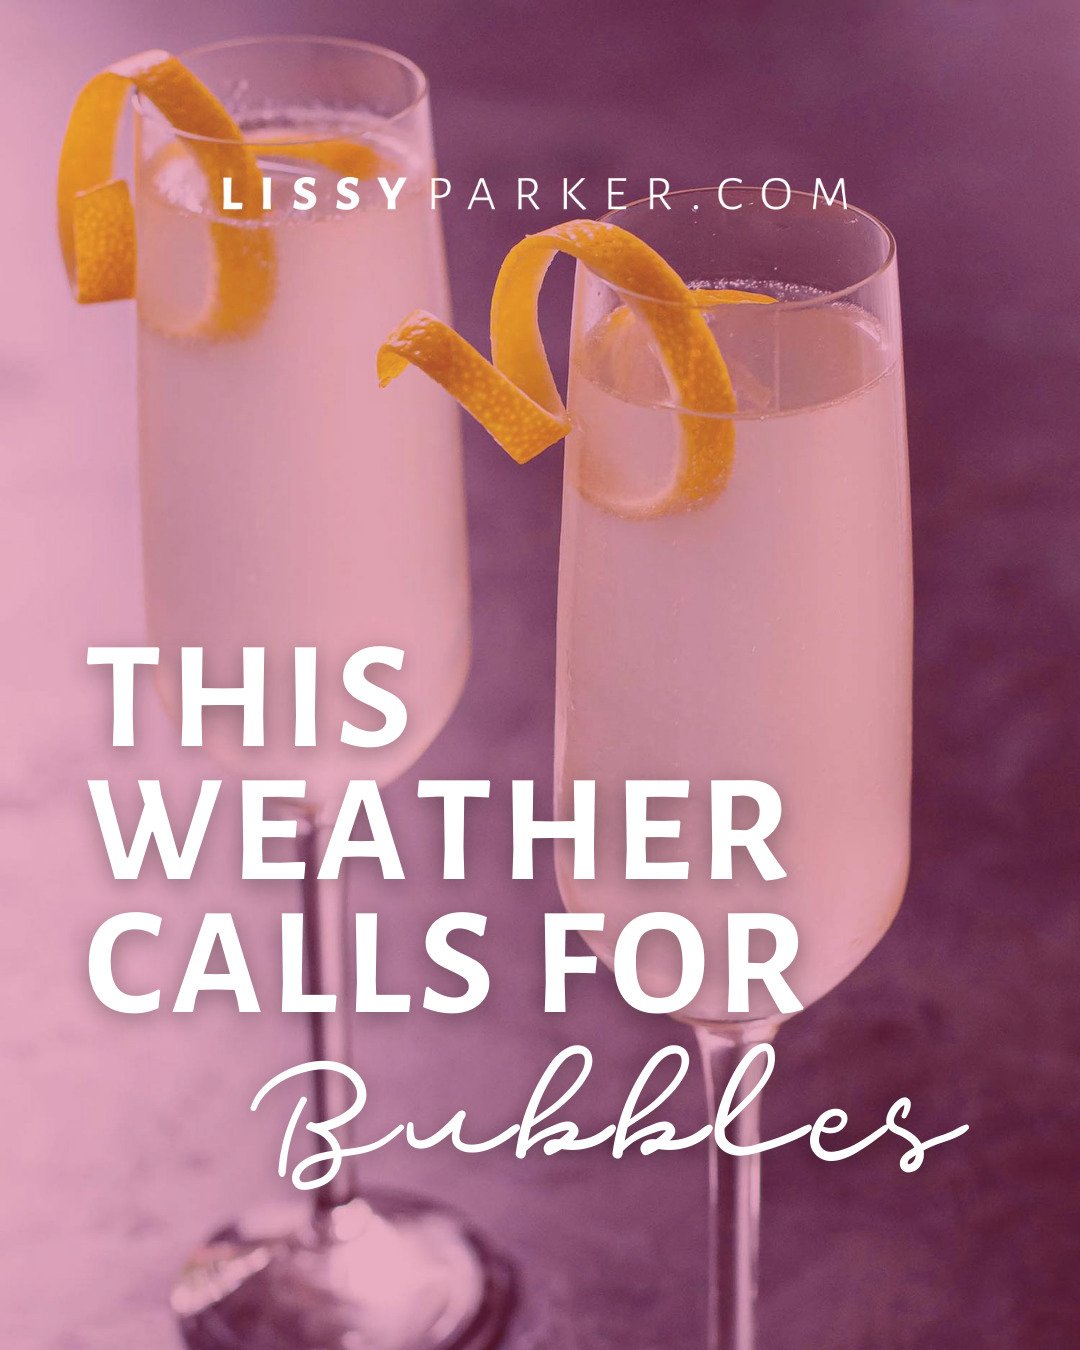 This weather calls for some bubbles&hellip;

Have you ever tried a French 75?

Ingredients:
1 oz gin
1/2 oz lemon juice
1/2 oz simple syrup
2 oz champagne
Lemon twist for garnish
Instructions:
In a cocktail shaker filled with ice, add gin, lemon juic